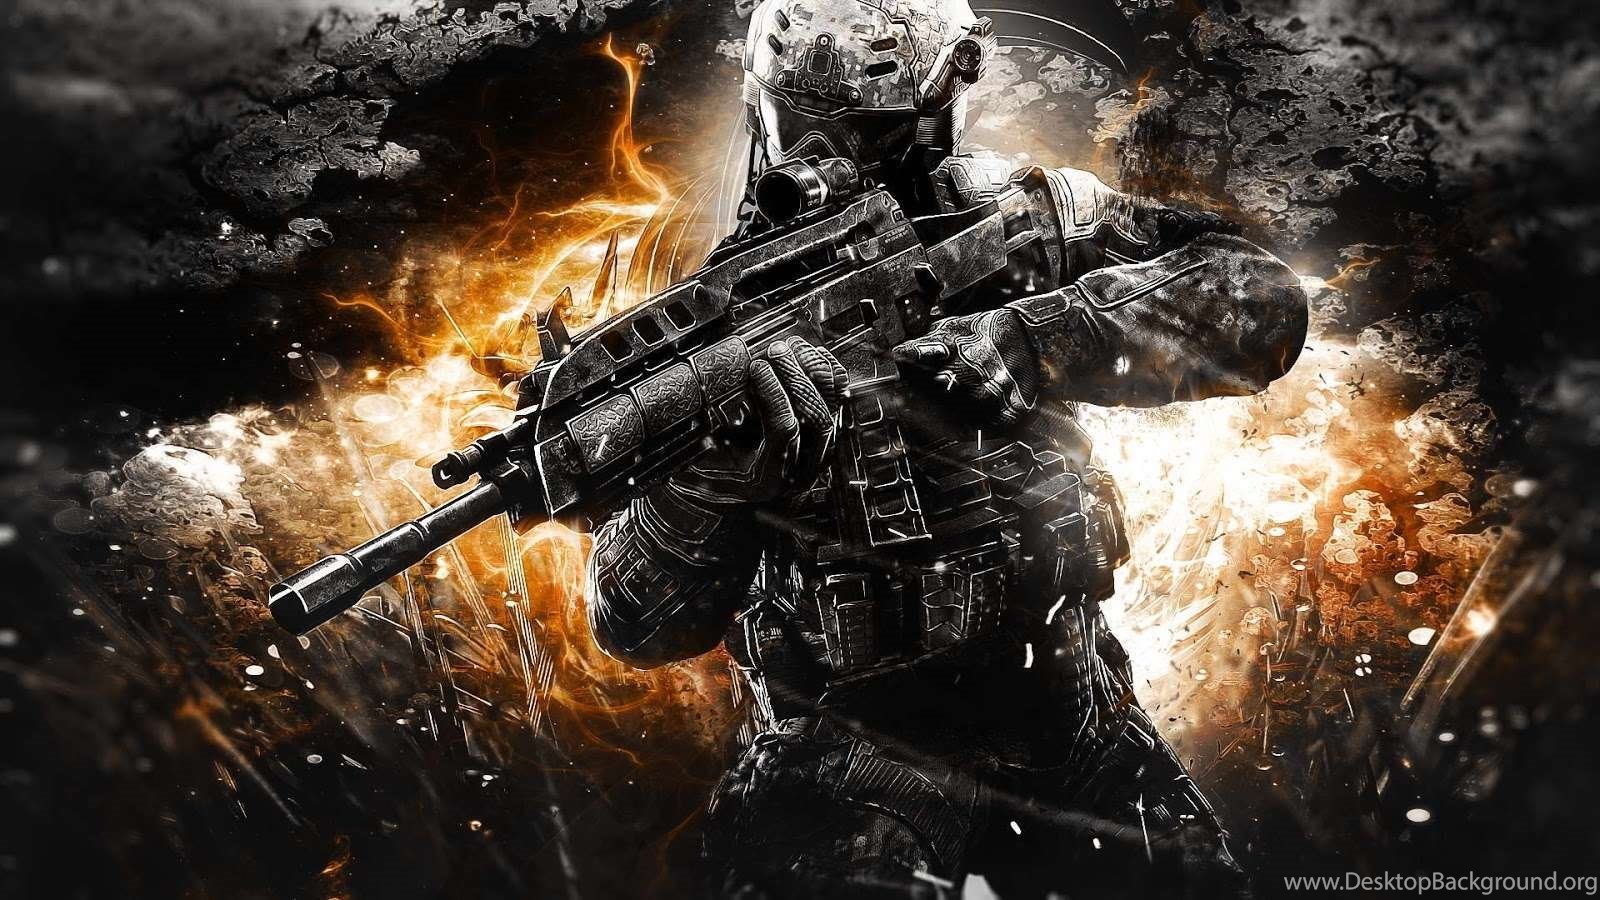 Call of duty 2 zombies wallpapercod black ops 2 zombies wallpapers